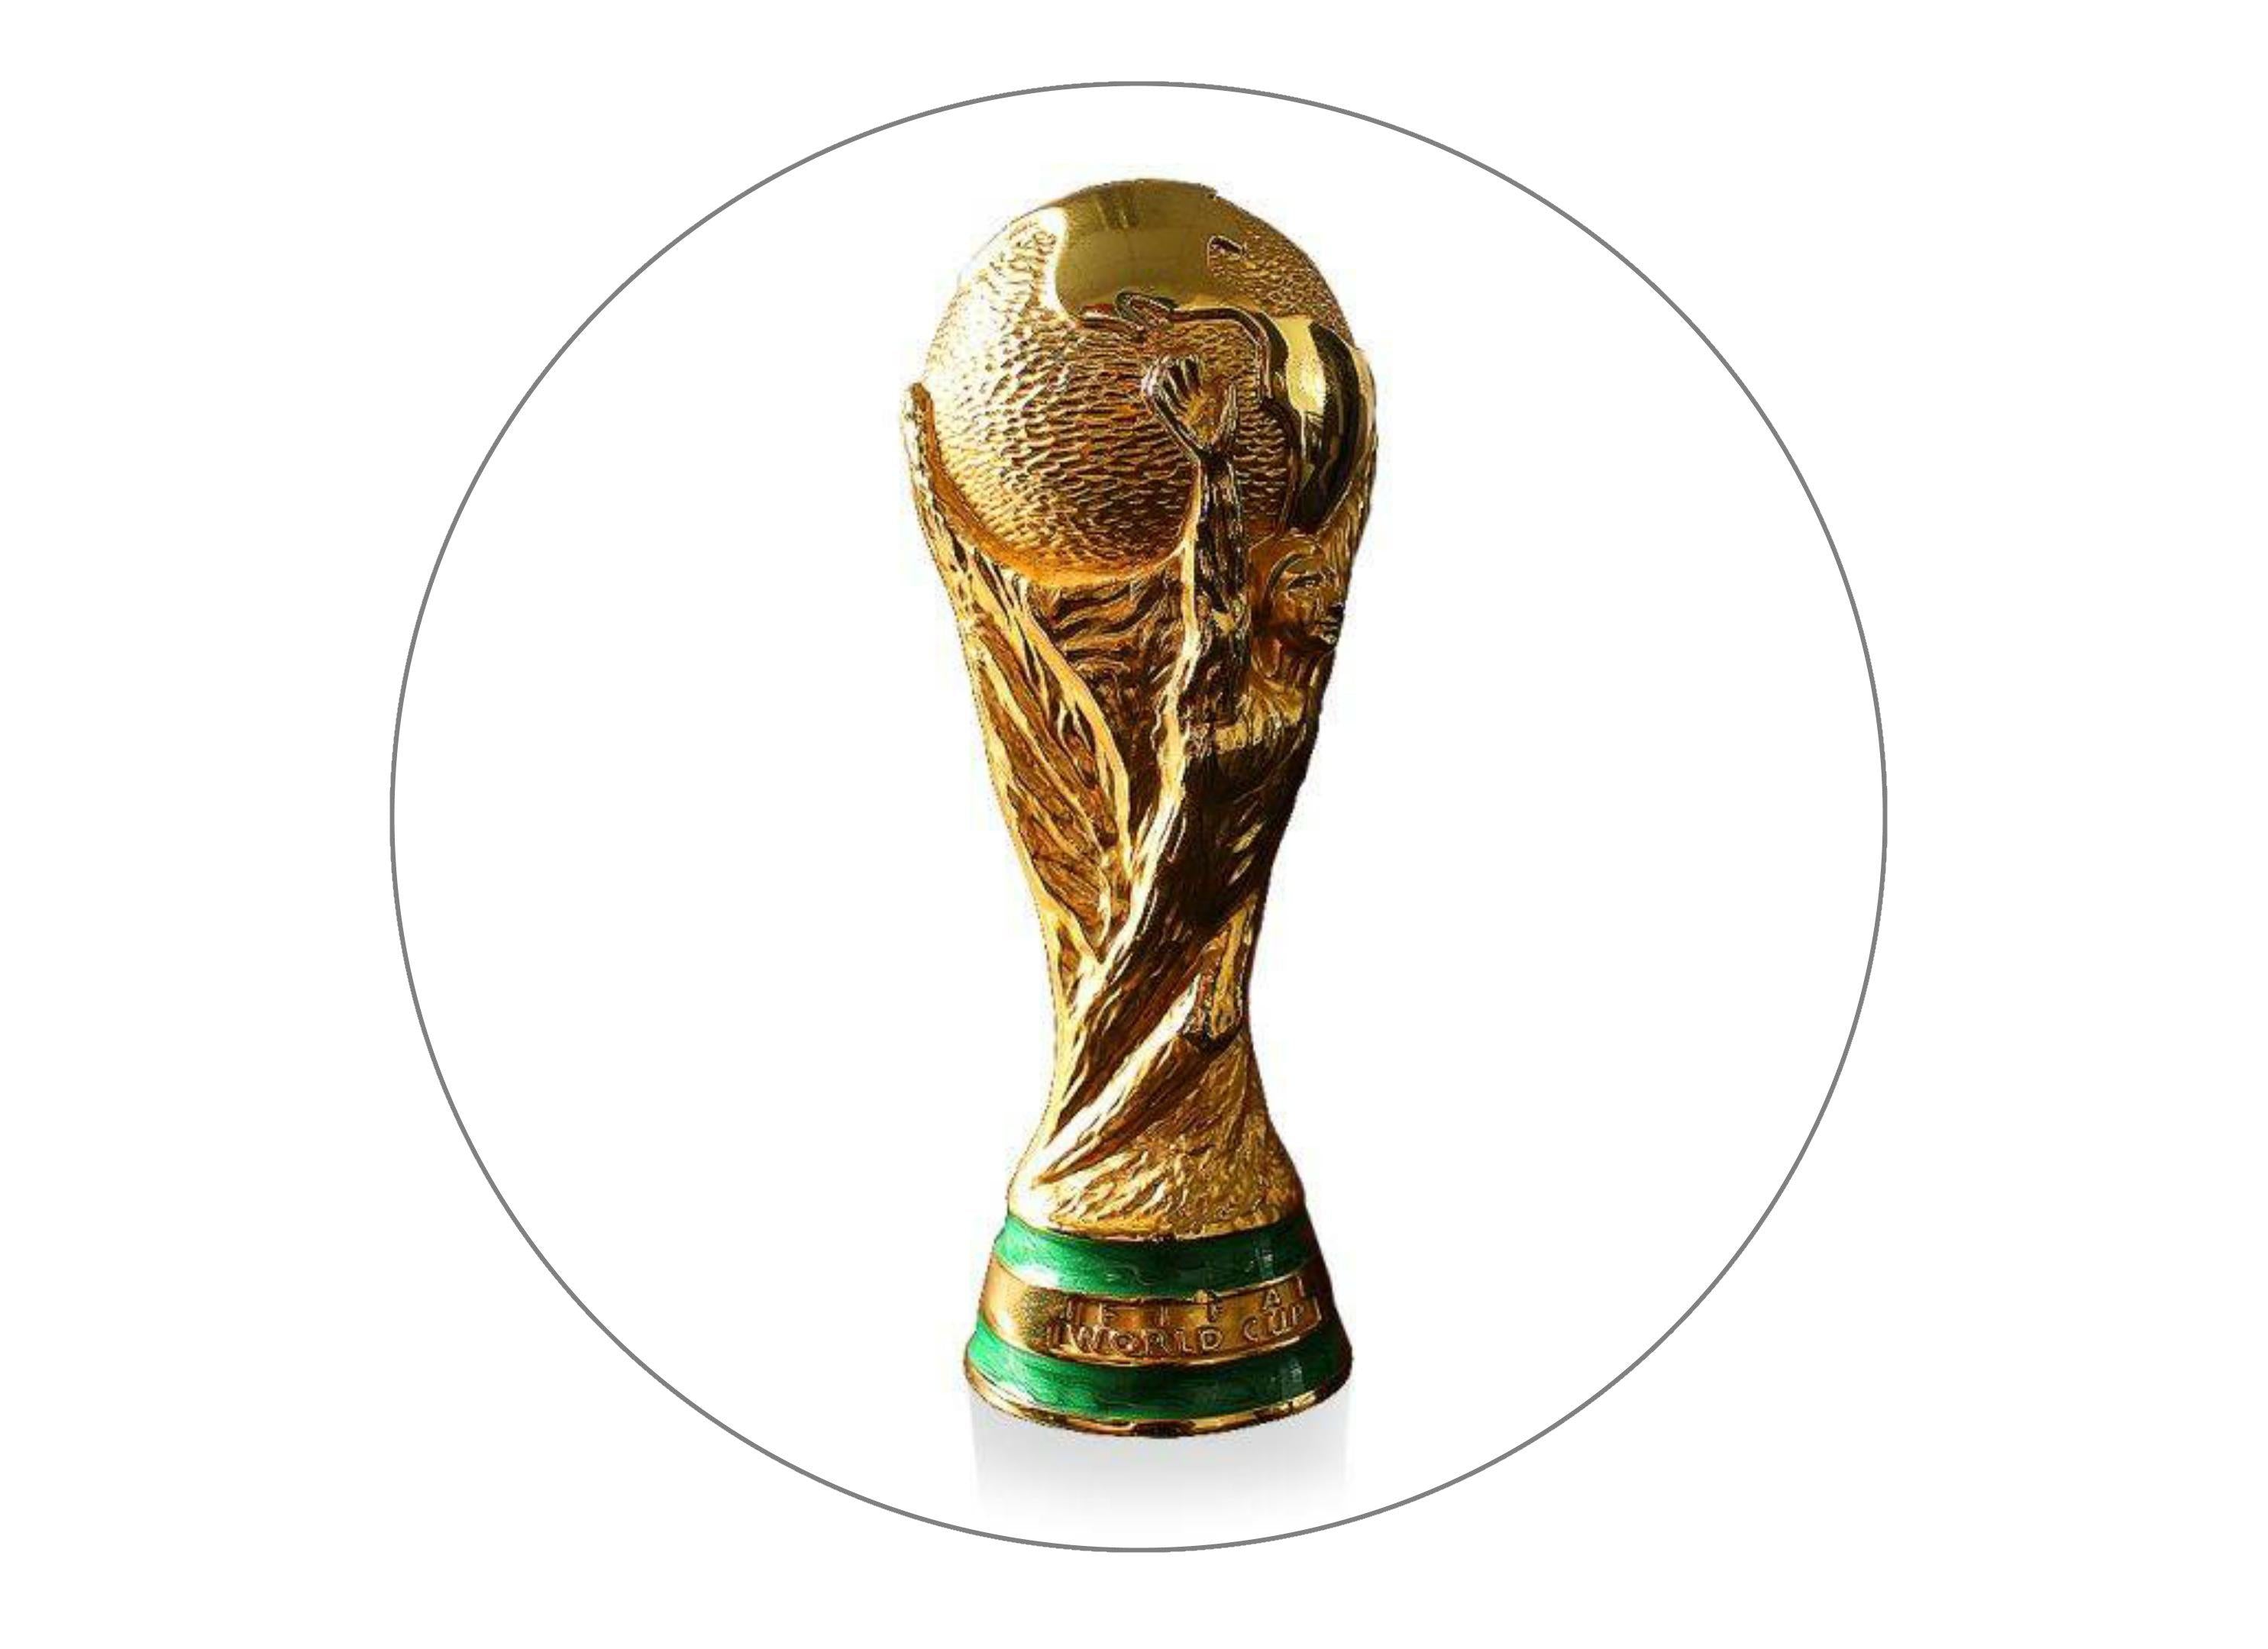 190mm round cake topper with a picture of the FIFA World Cup Trophy